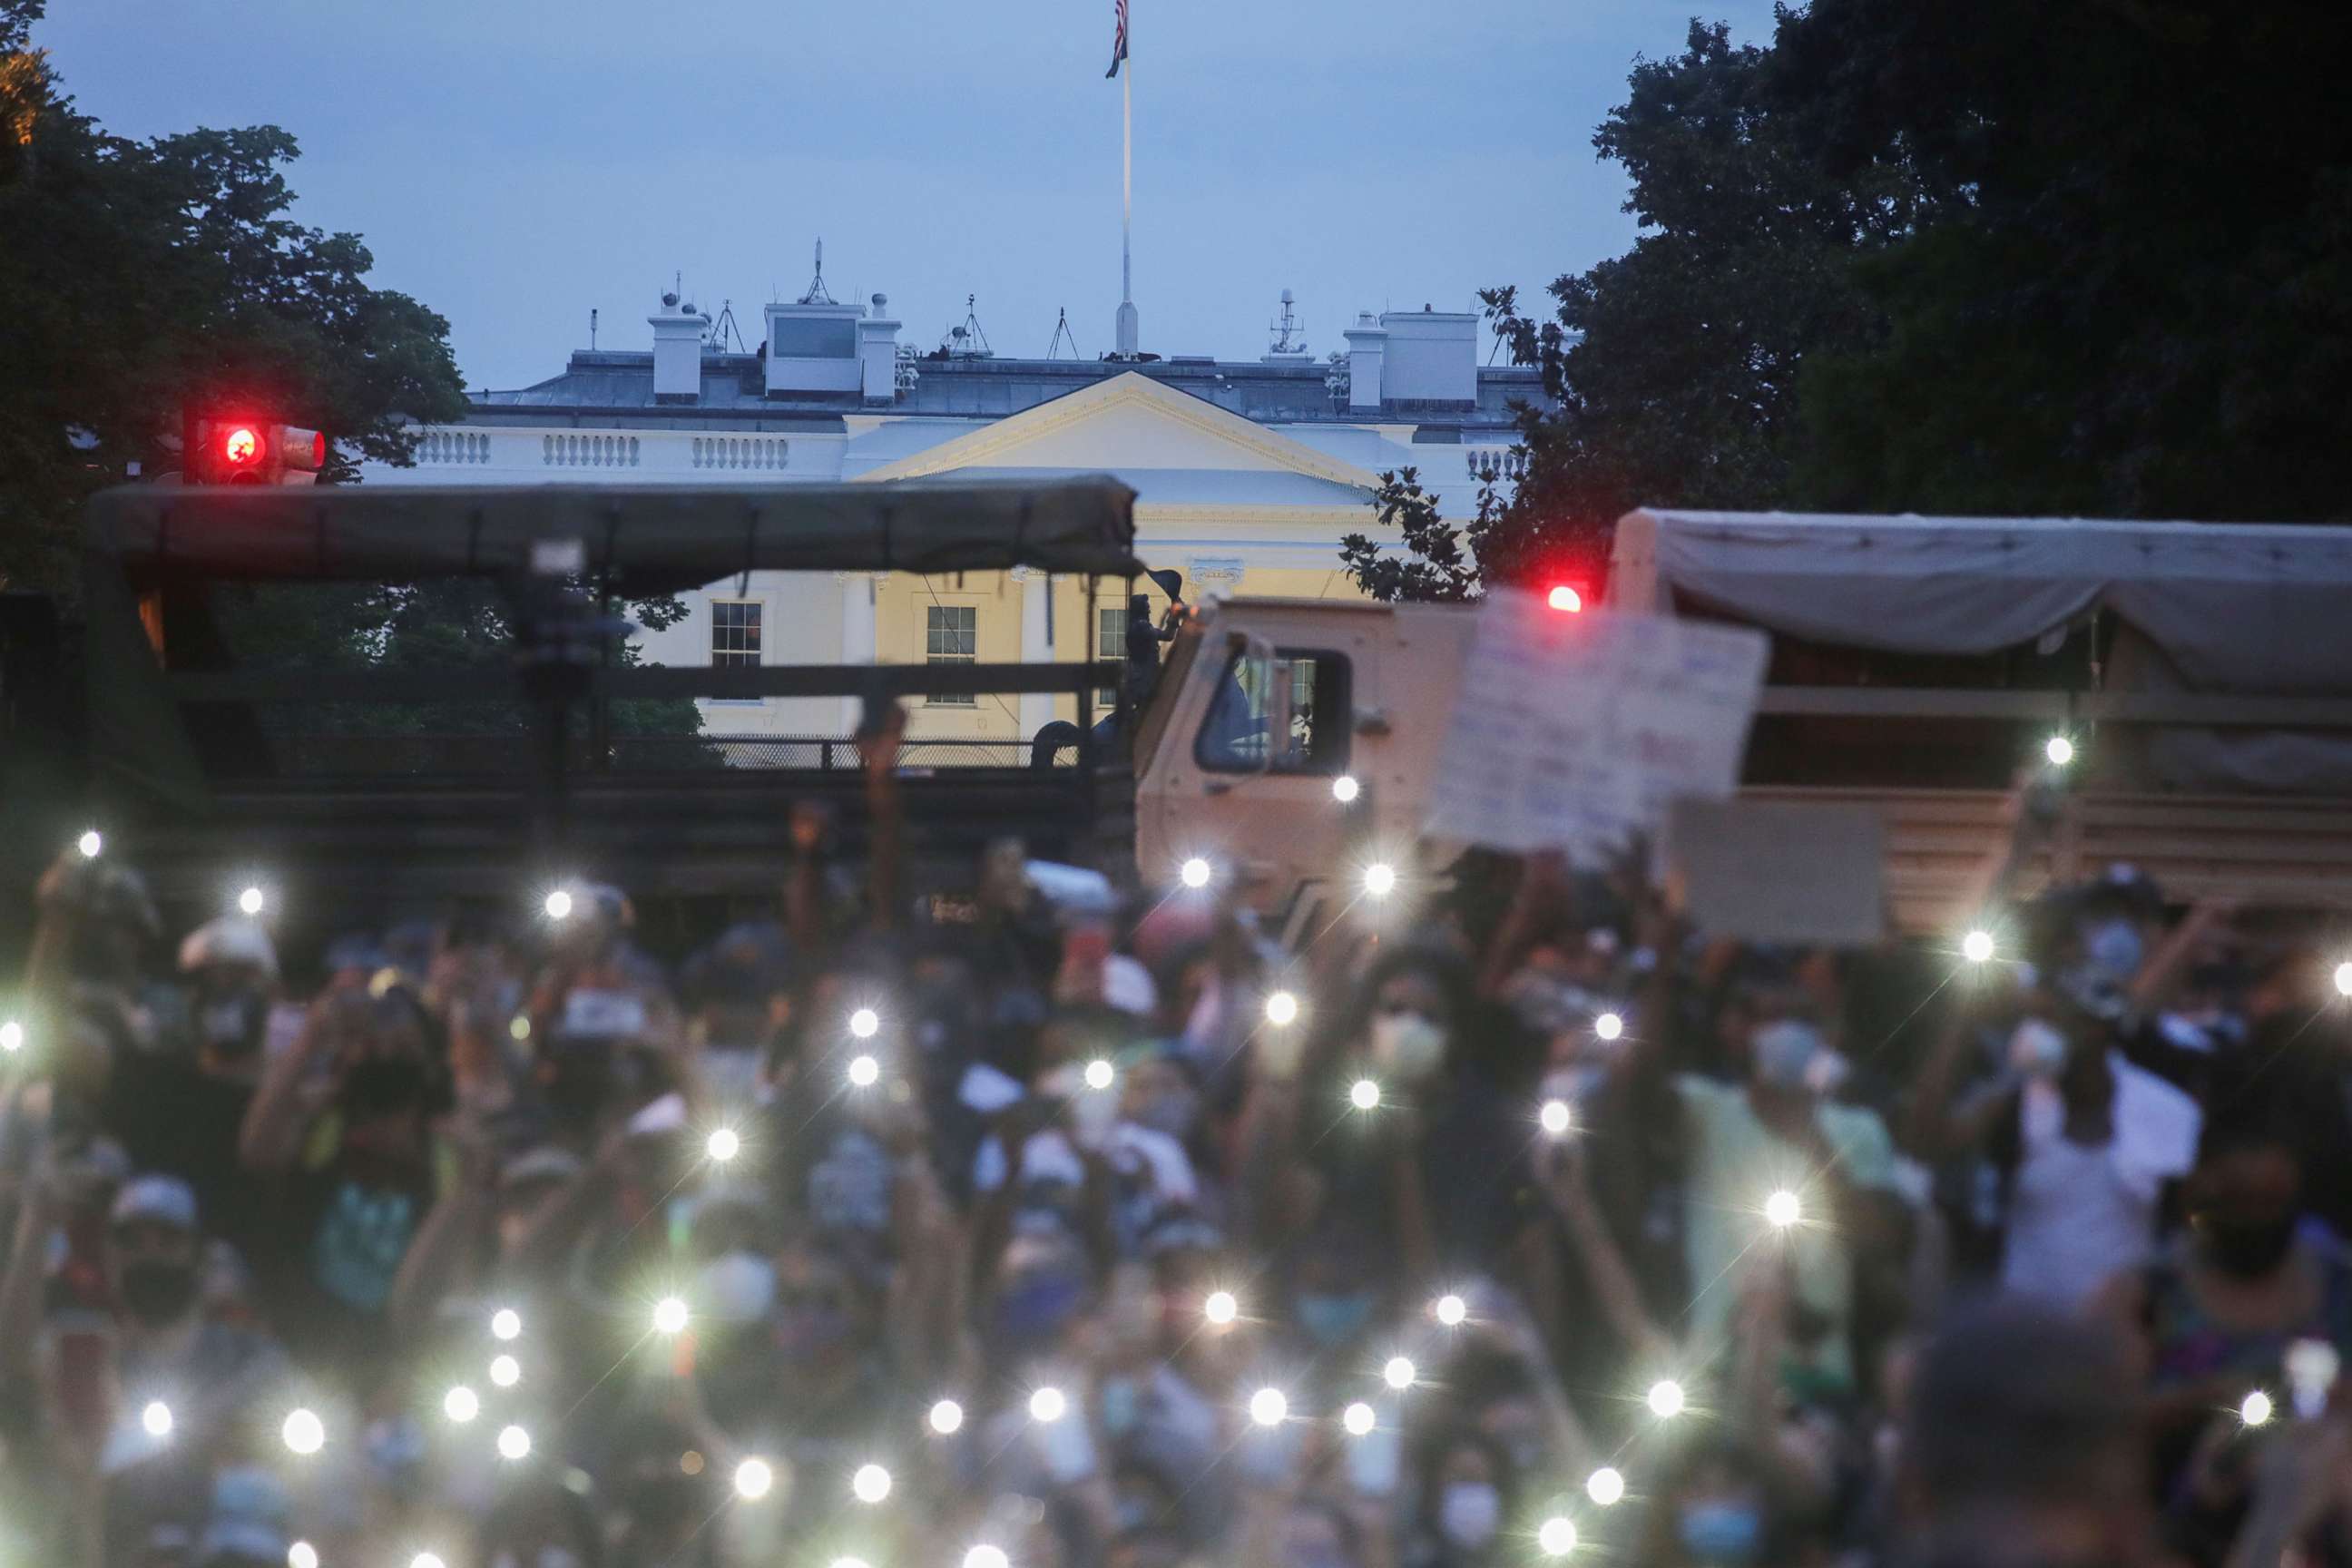 PHOTO: Demonstrators use the light of their cellphones as they gather during a protest against the death in Minneapolis police custody of George Floyd, near the White House in Washington, June 3, 2020.